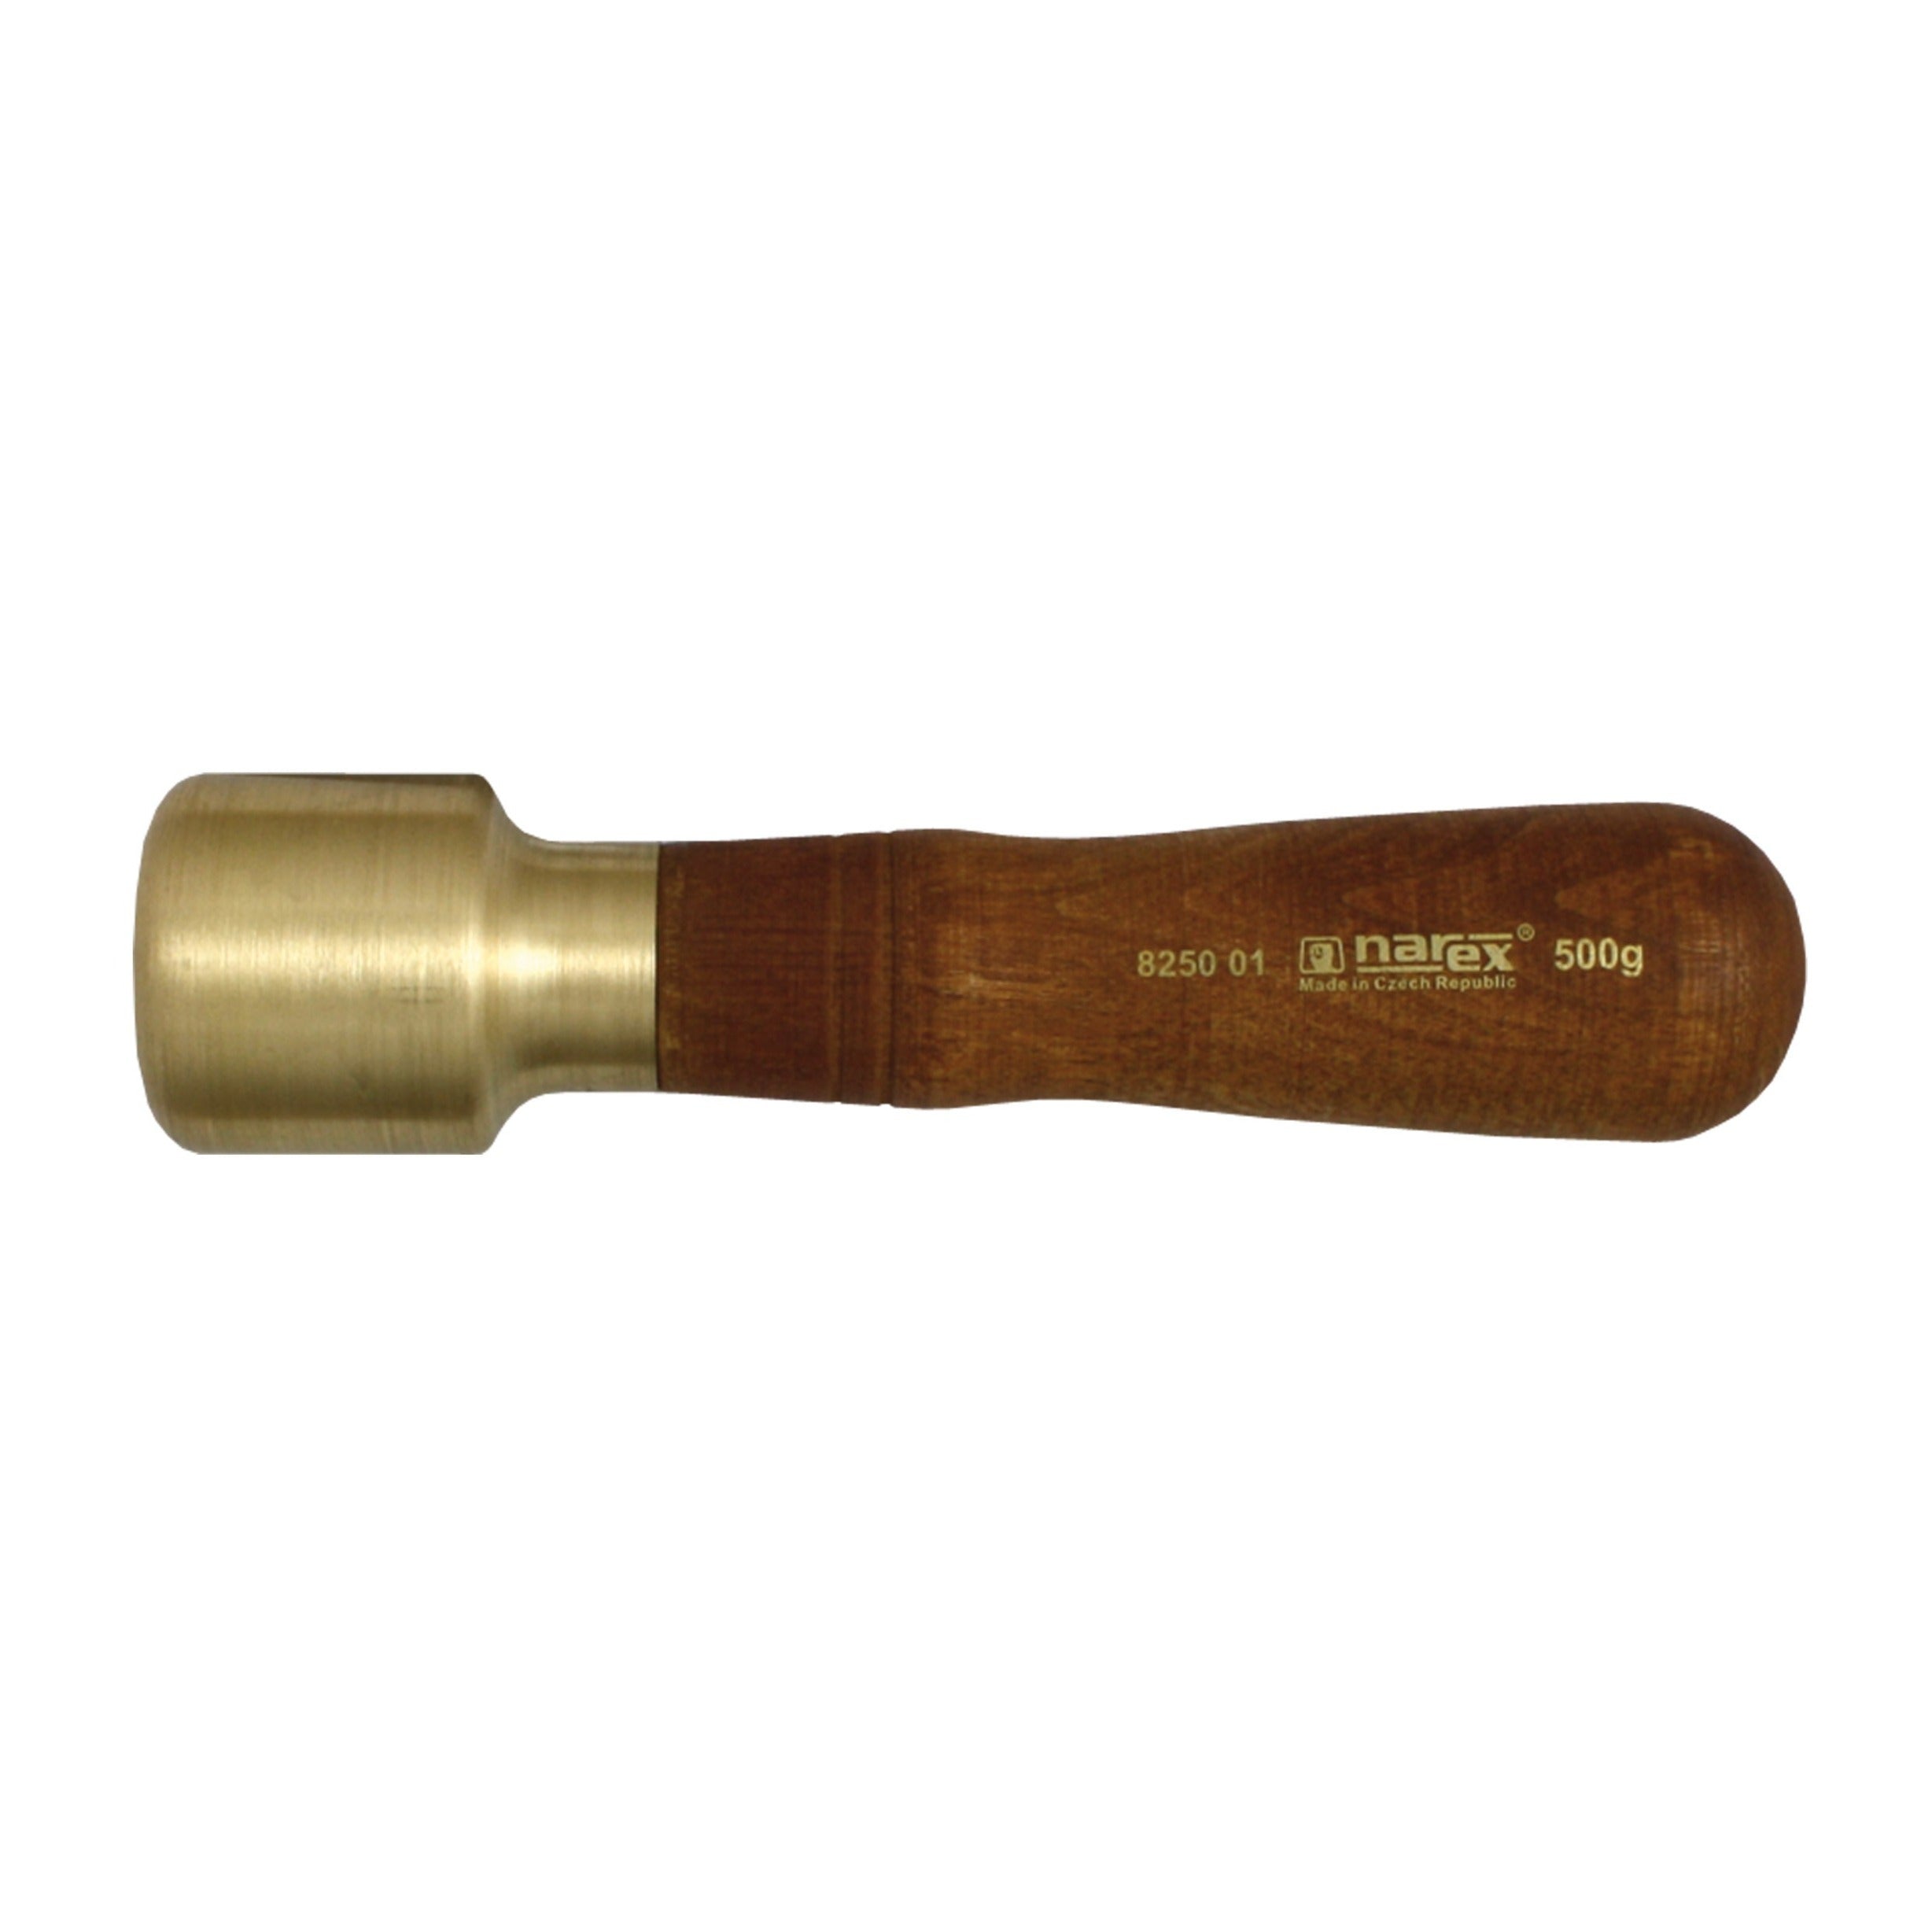 Brass Carving Mallet 825001 by Narex